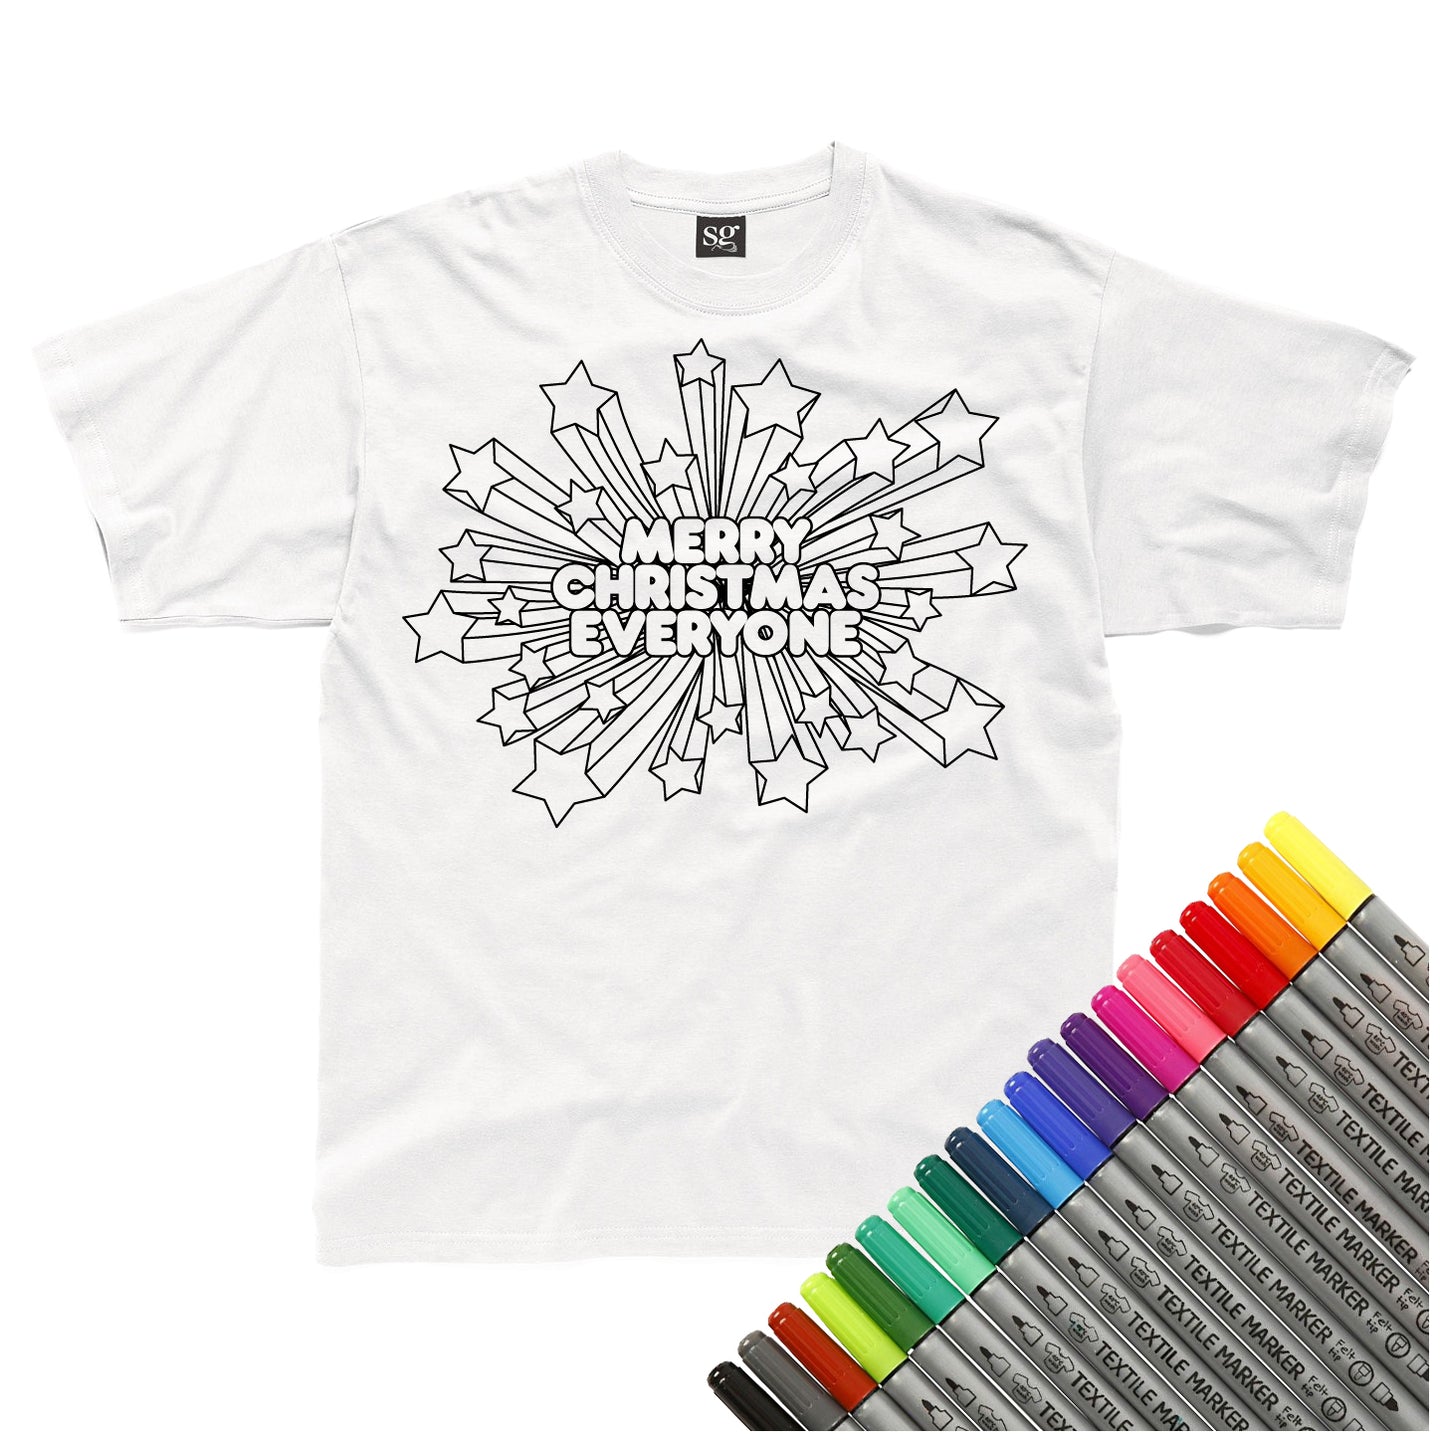 Merry Christmas Everyone Colour-In T-Shirt (fabric pens optional)